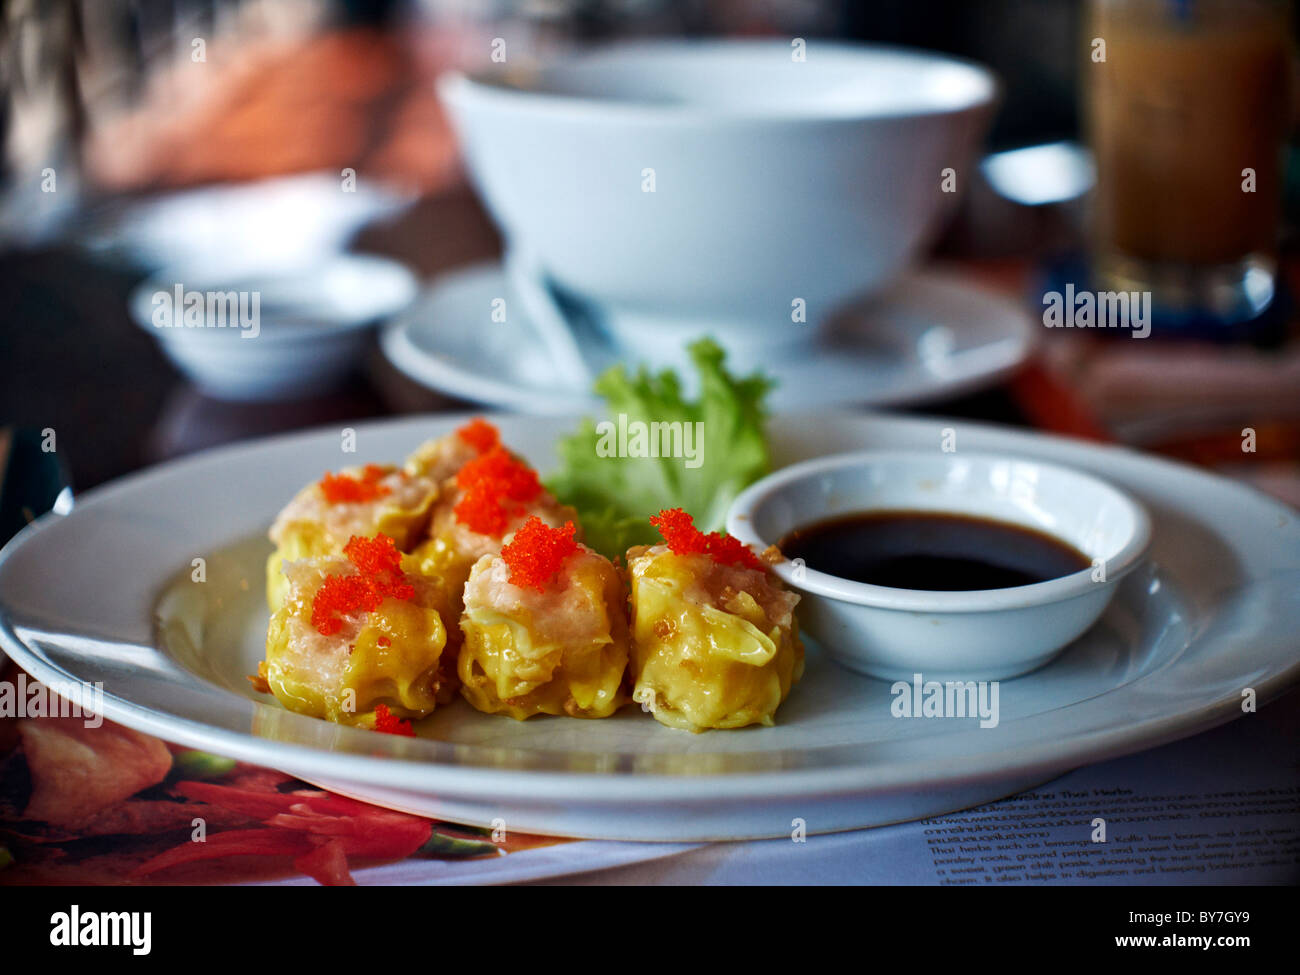 Dim Sum appetiser and complementary sauce dip. Thailand S. E. Asia Stock Photo